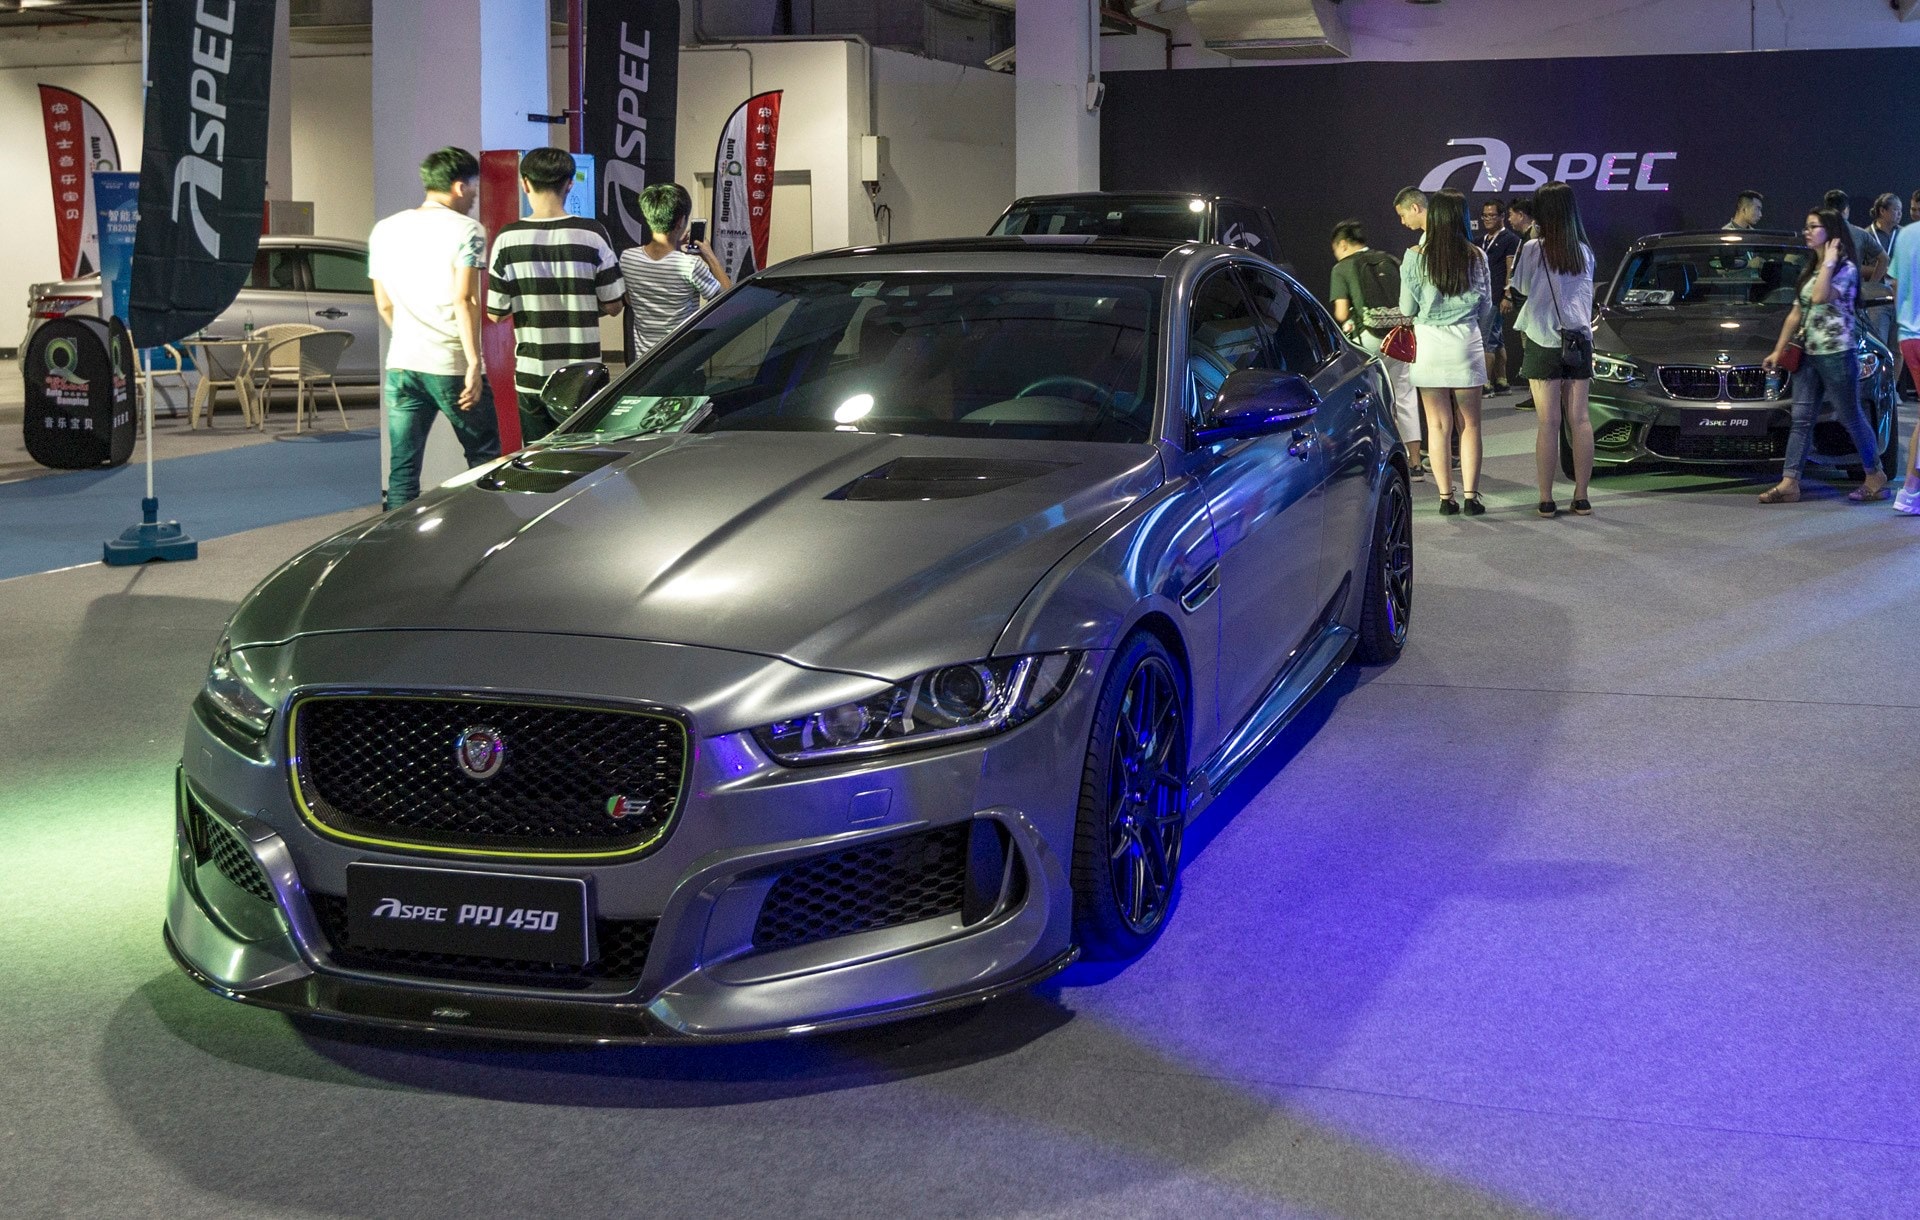 Jaguar XE Body Kit With Vented Hood Comes from China's Tuner Aspec ...